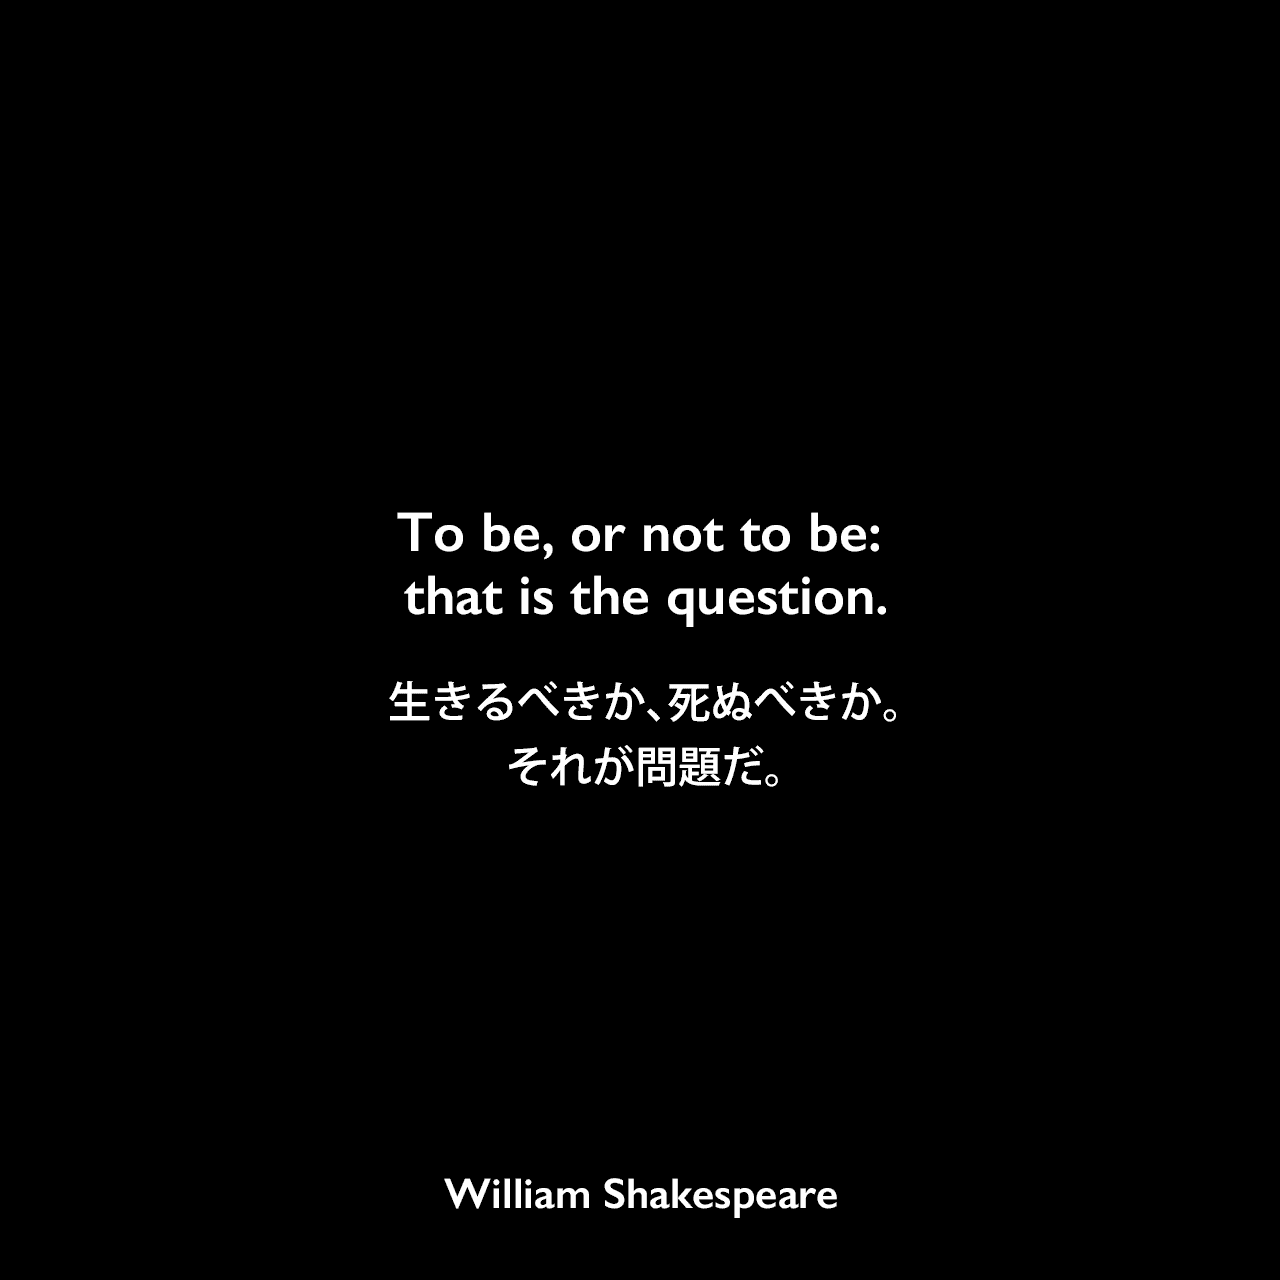 To be, or not to be: that is the question.生きるべきか、死ぬべきか。それが問題だ。William Shakespeare